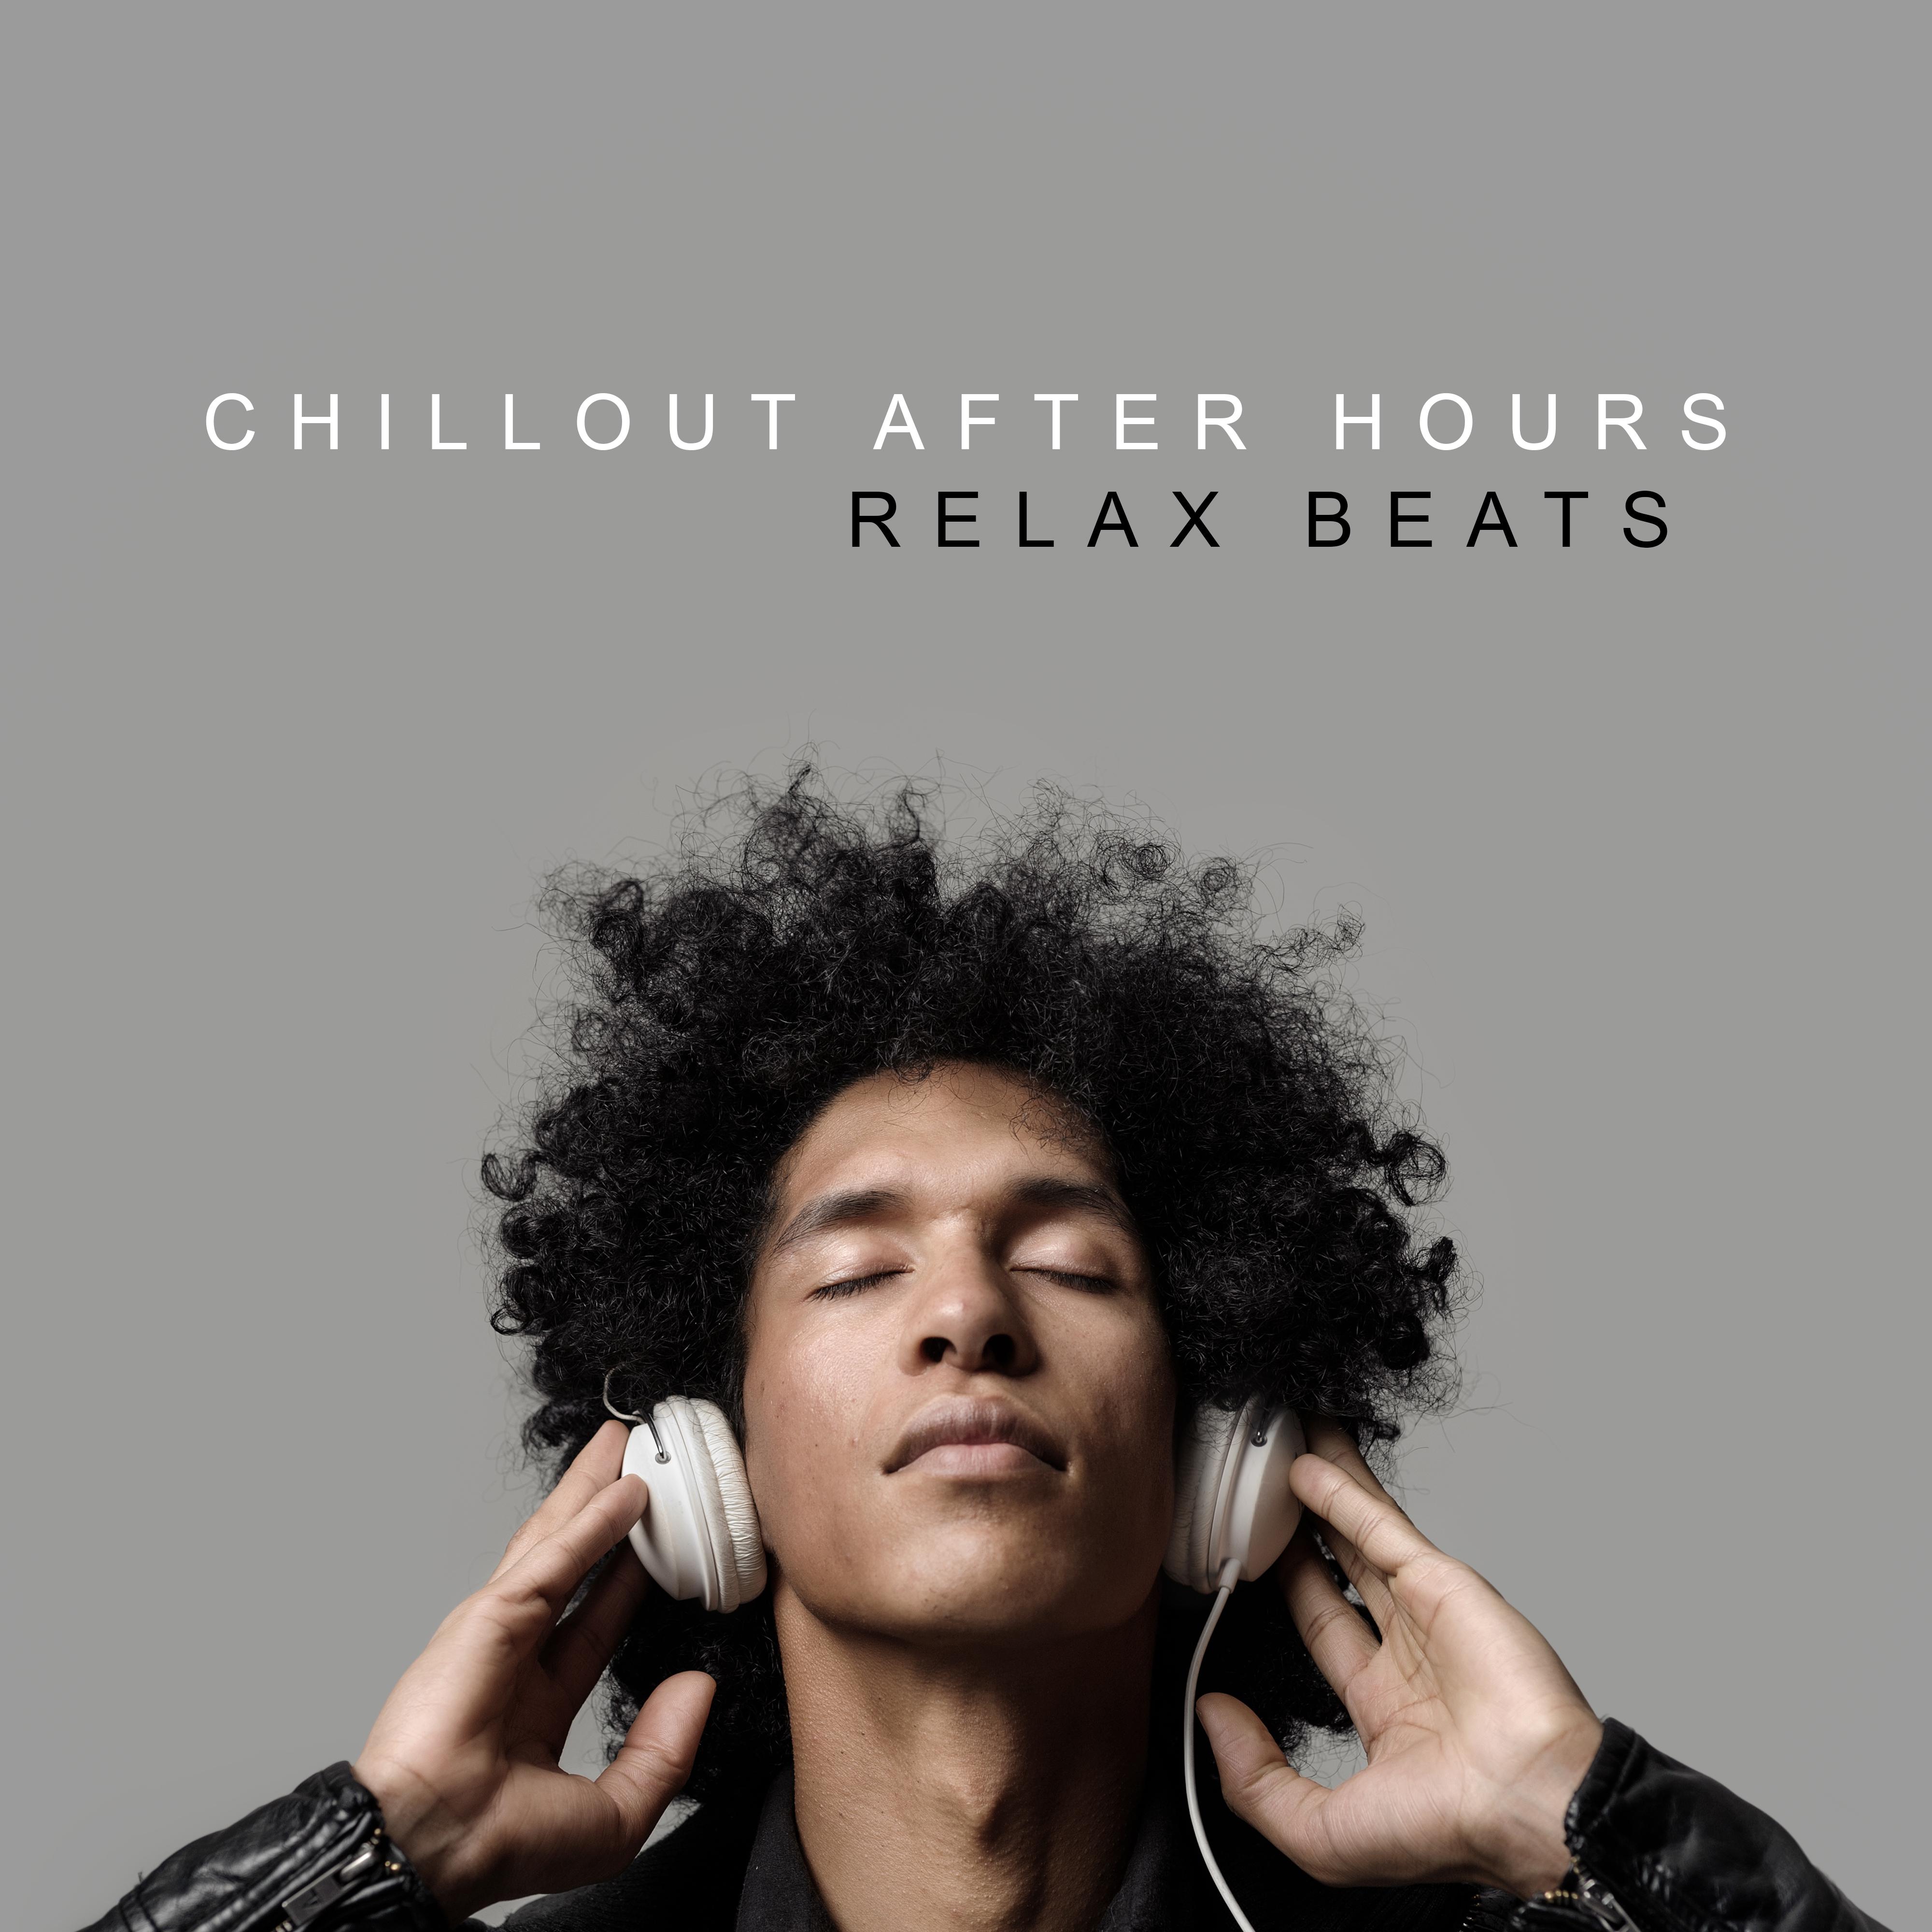 Chillout After Hours Relax Beats